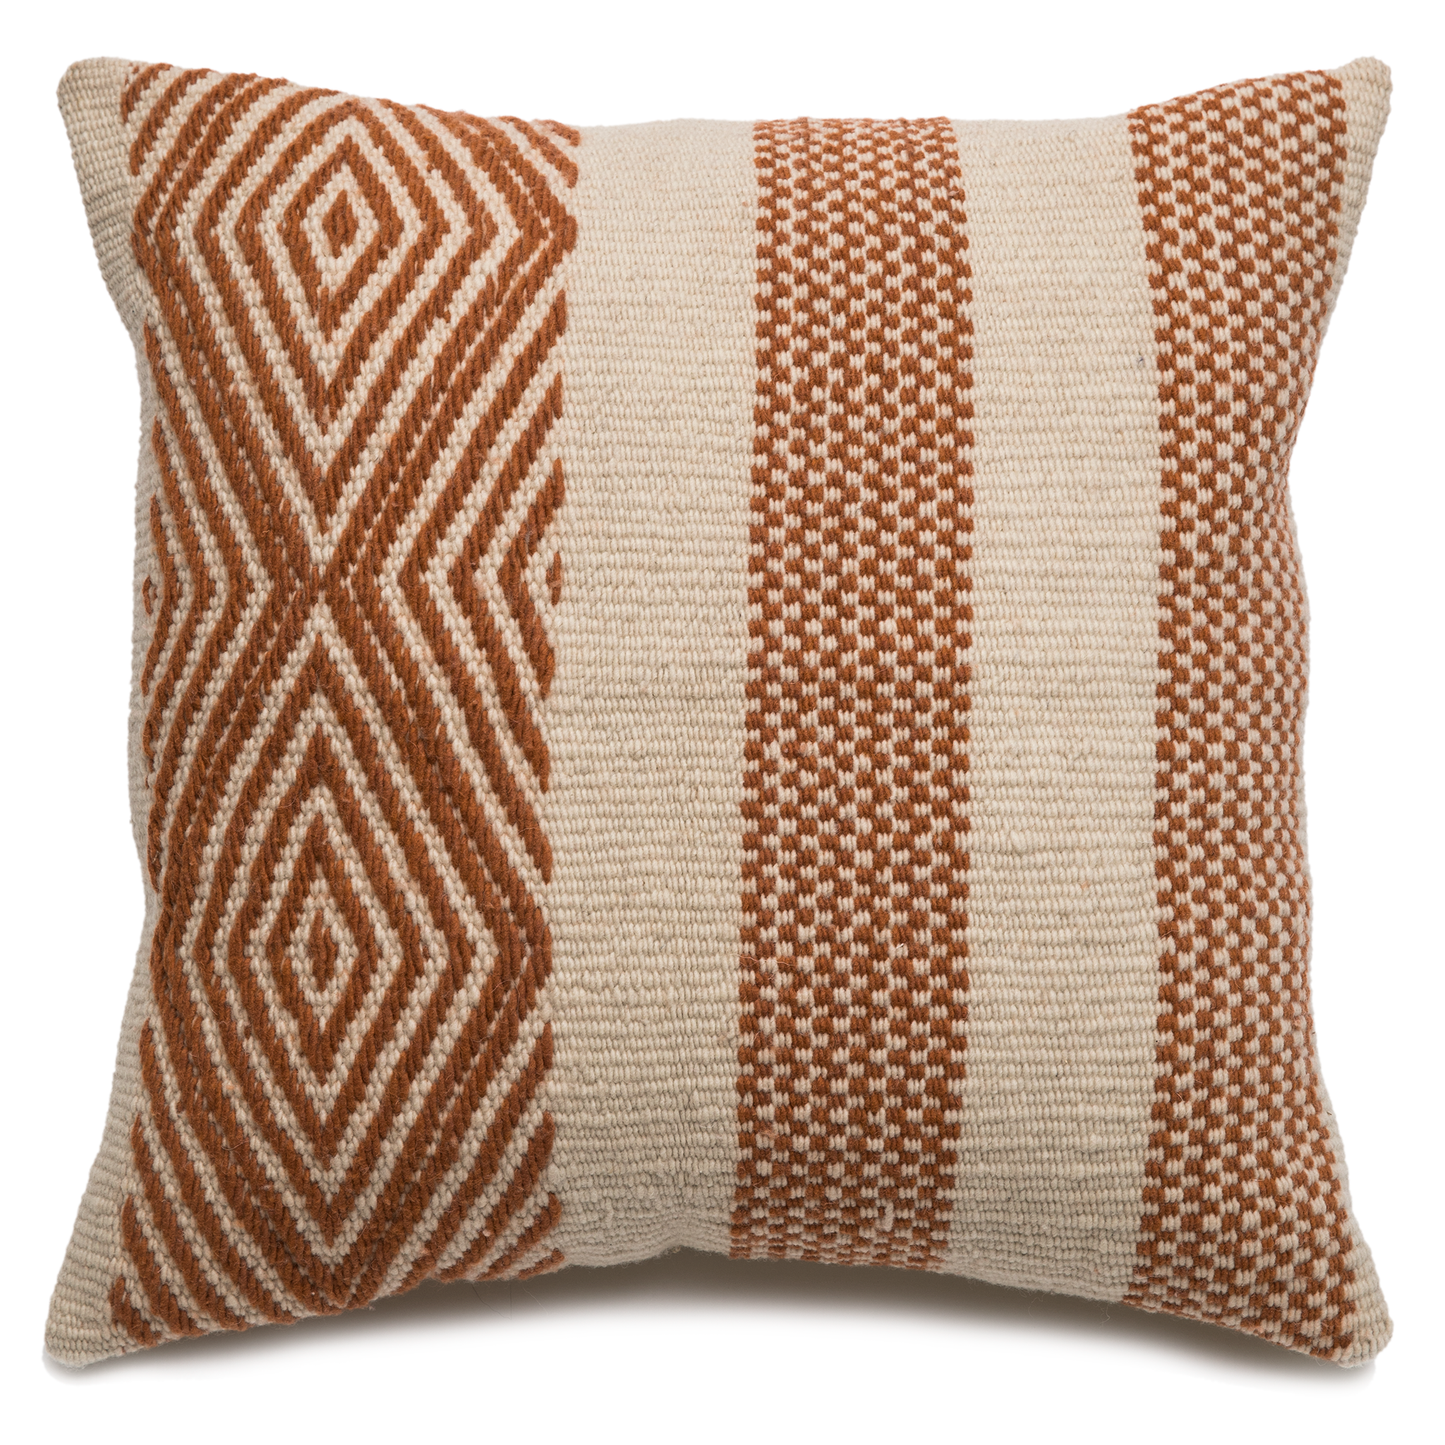 Intiearth hand woven terracotta botanically dyed decorative wool pillow Sacred Valley collection 20" square